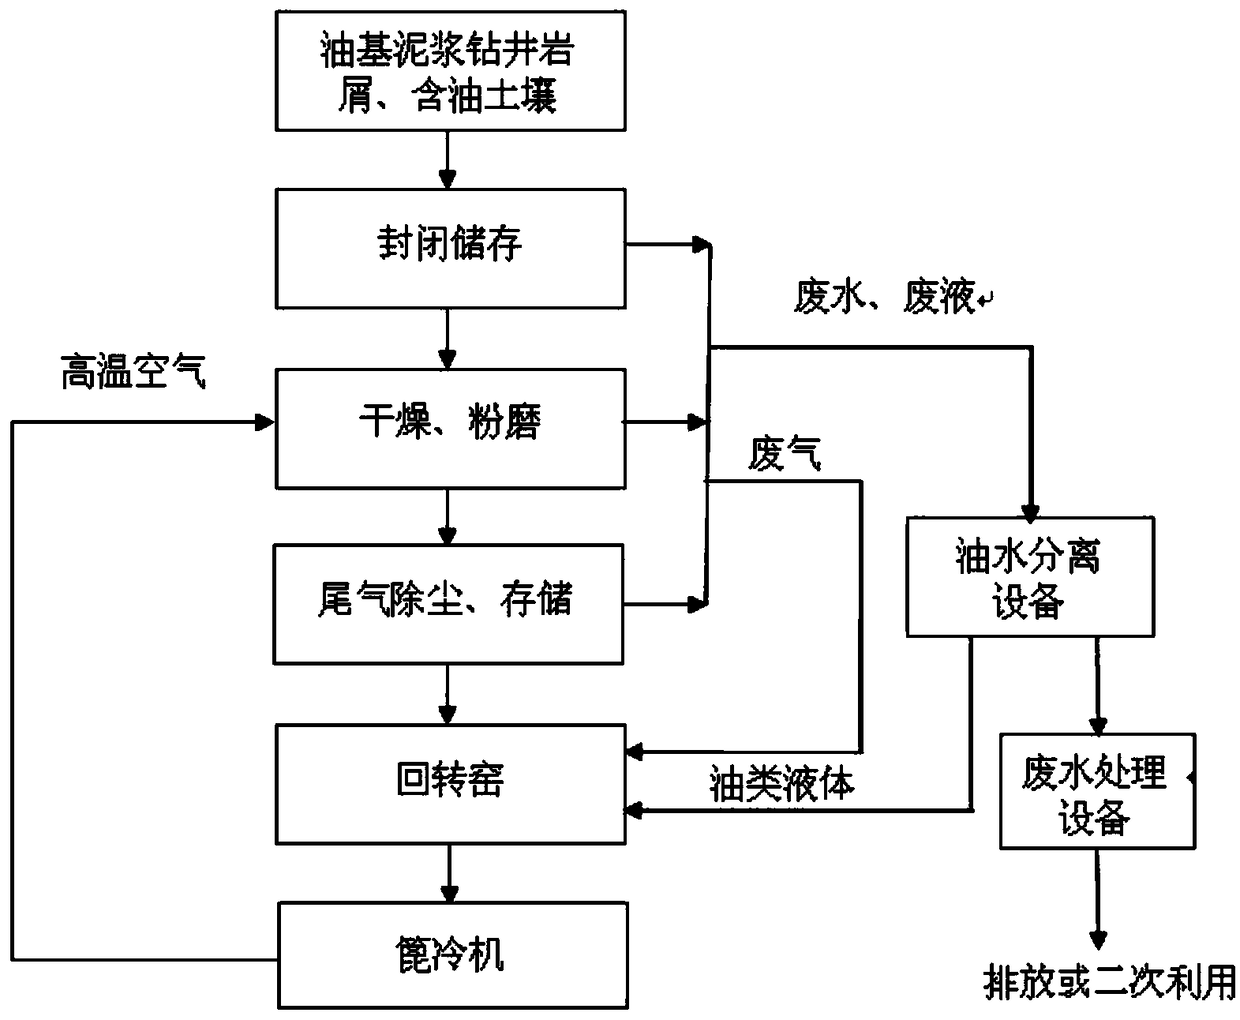 Equipment and method for cooperative treatment of drilling solid waste by using cement kiln